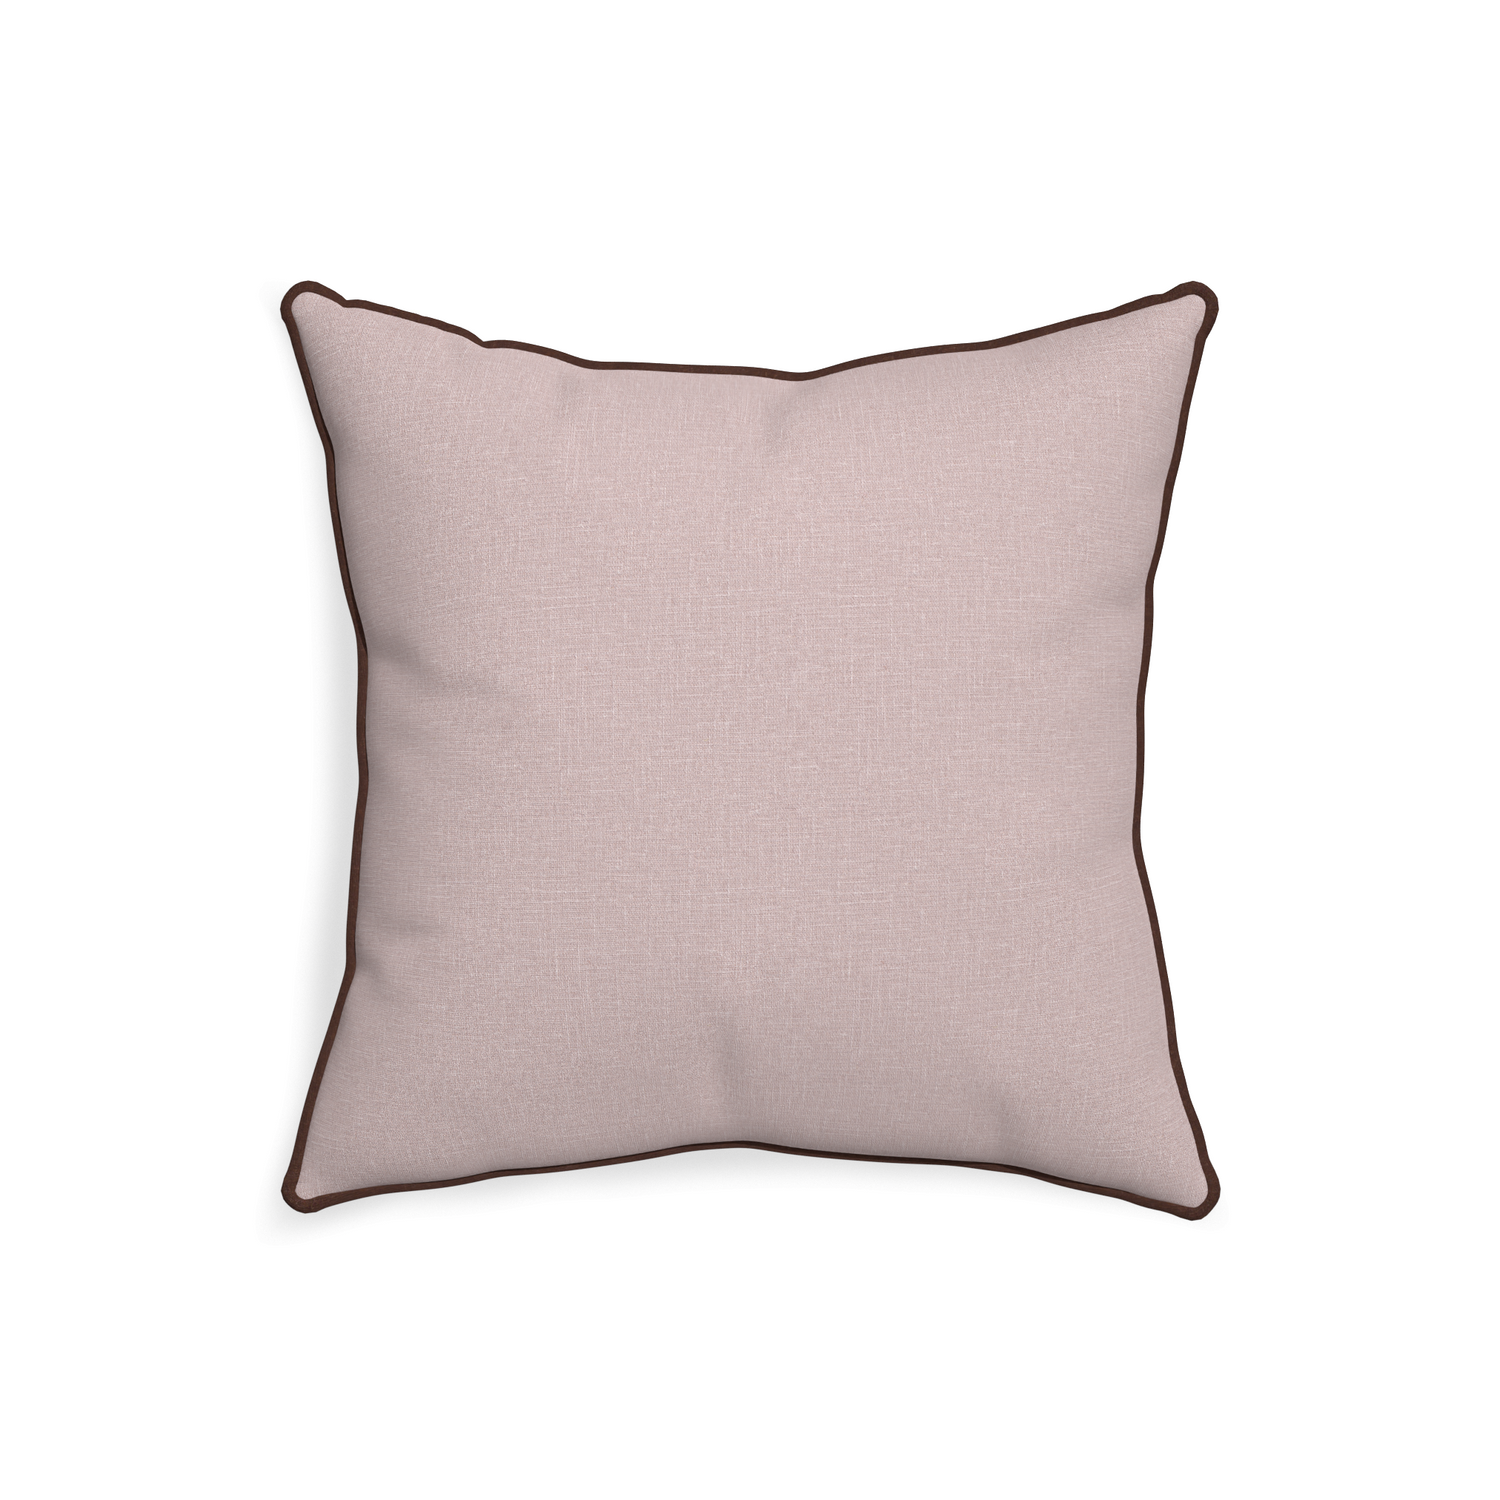 20-square orchid custom mauve pinkpillow with w piping on white background